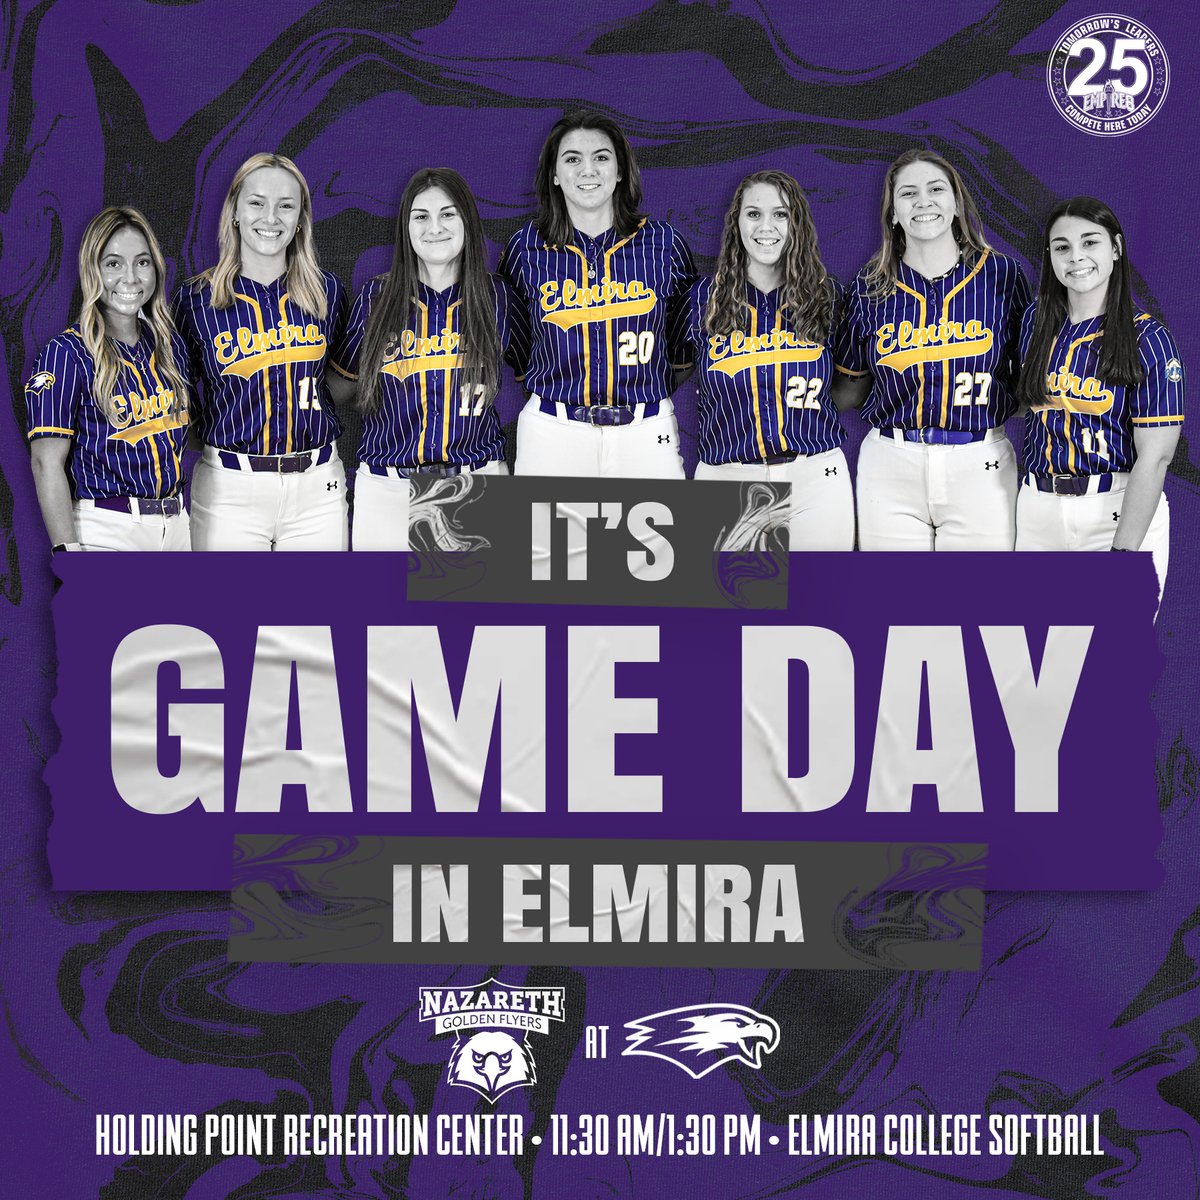 Jumping back into @Empire8 play as @ElmiraCollegeSB takes on the Golden Flyers on SENIOR DAY! 🥎🦅

🆚 Nazareth
🕦 11:30 AM/1:30 PM 
📍 Horseheads, NY | Holding Point
📺 & 📊: bit.ly/3lKw2jp

#TogetherWeFly #FightOn4EC #ElmiraProud